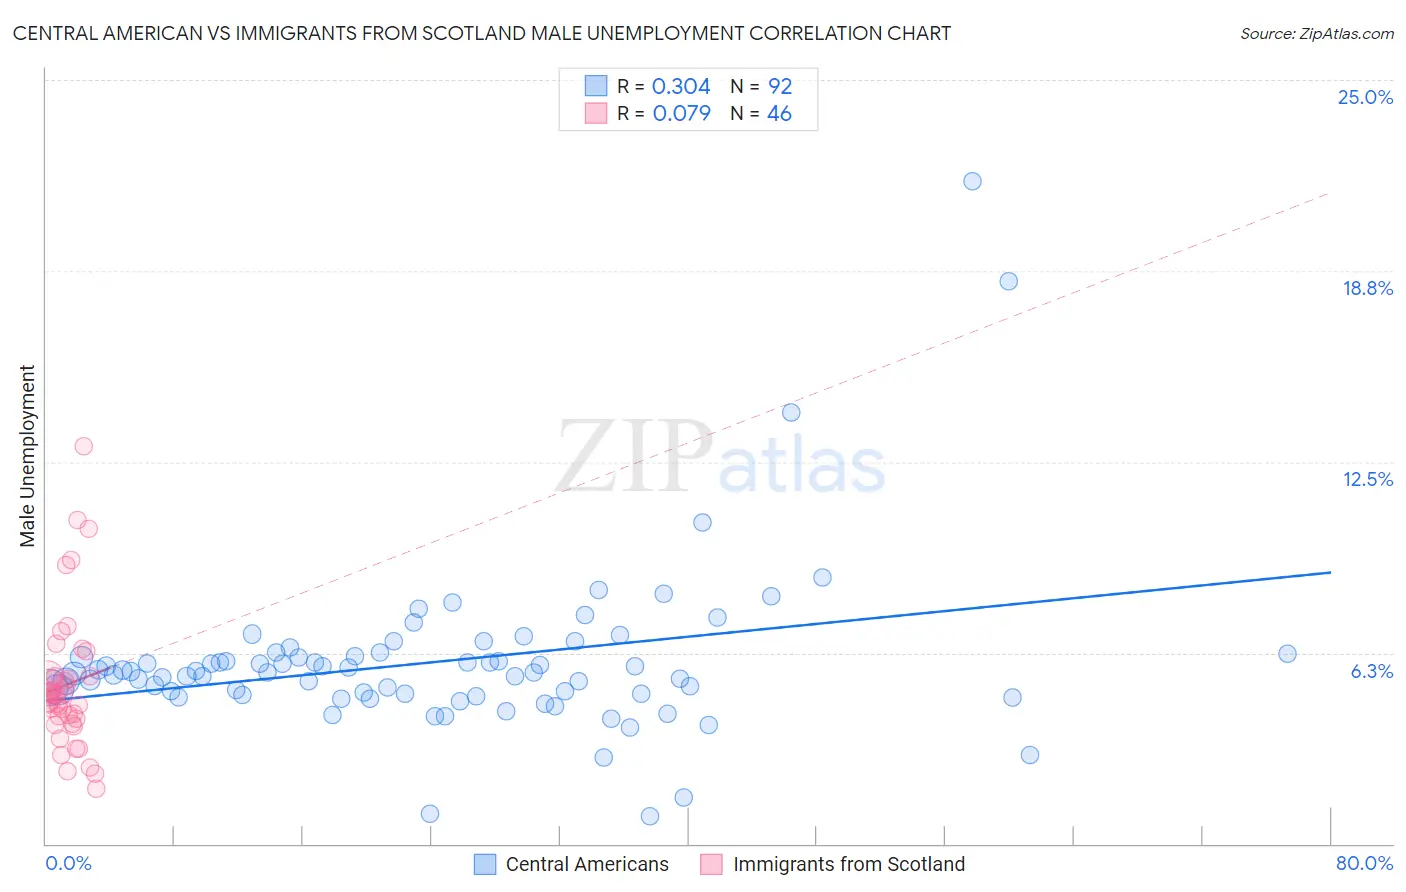 Central American vs Immigrants from Scotland Male Unemployment